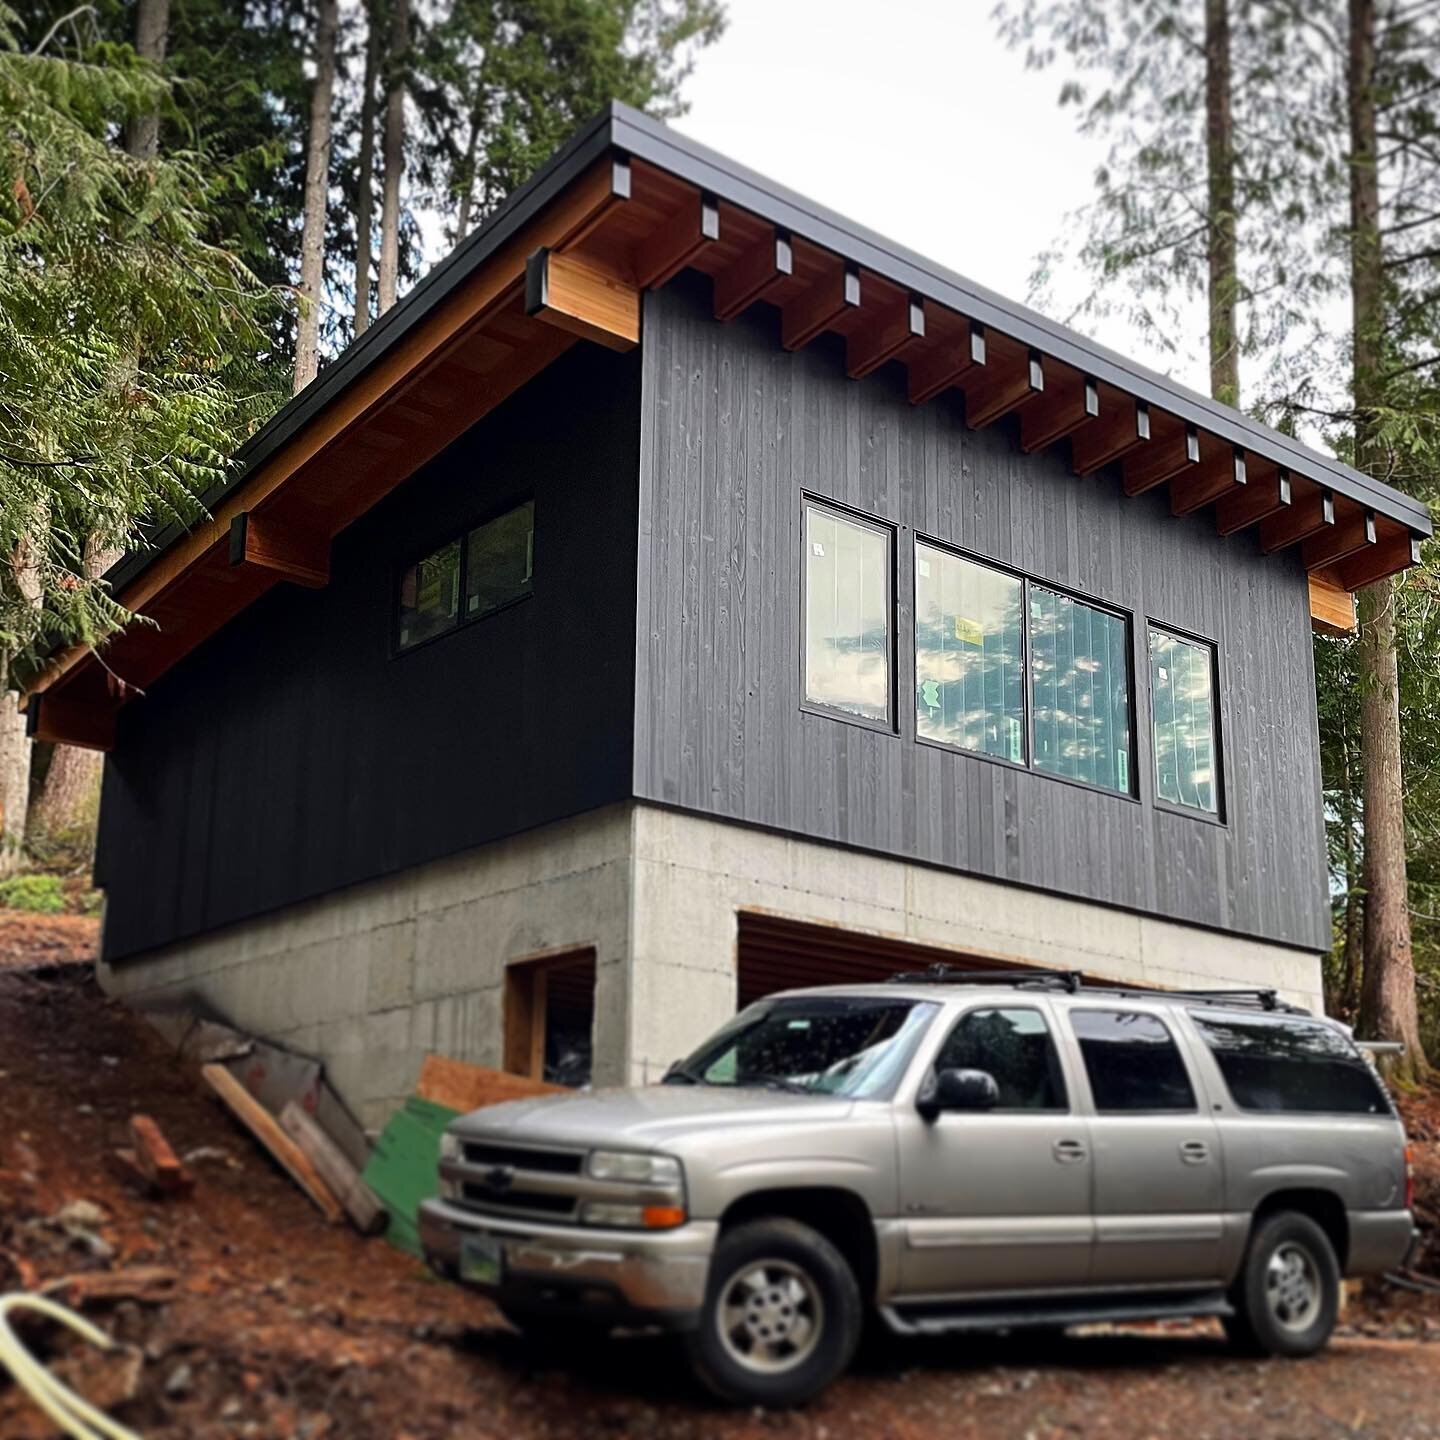 #projectprogressupdate  The Shou Sugi Ban siding for the Skagit County Lakehouse is making its appearance on the ADU garage at the rear of the house.
 
Shou Sugi Ban (or Yakisugi) is an ancient Japanese exterior siding technique that strengthens the 